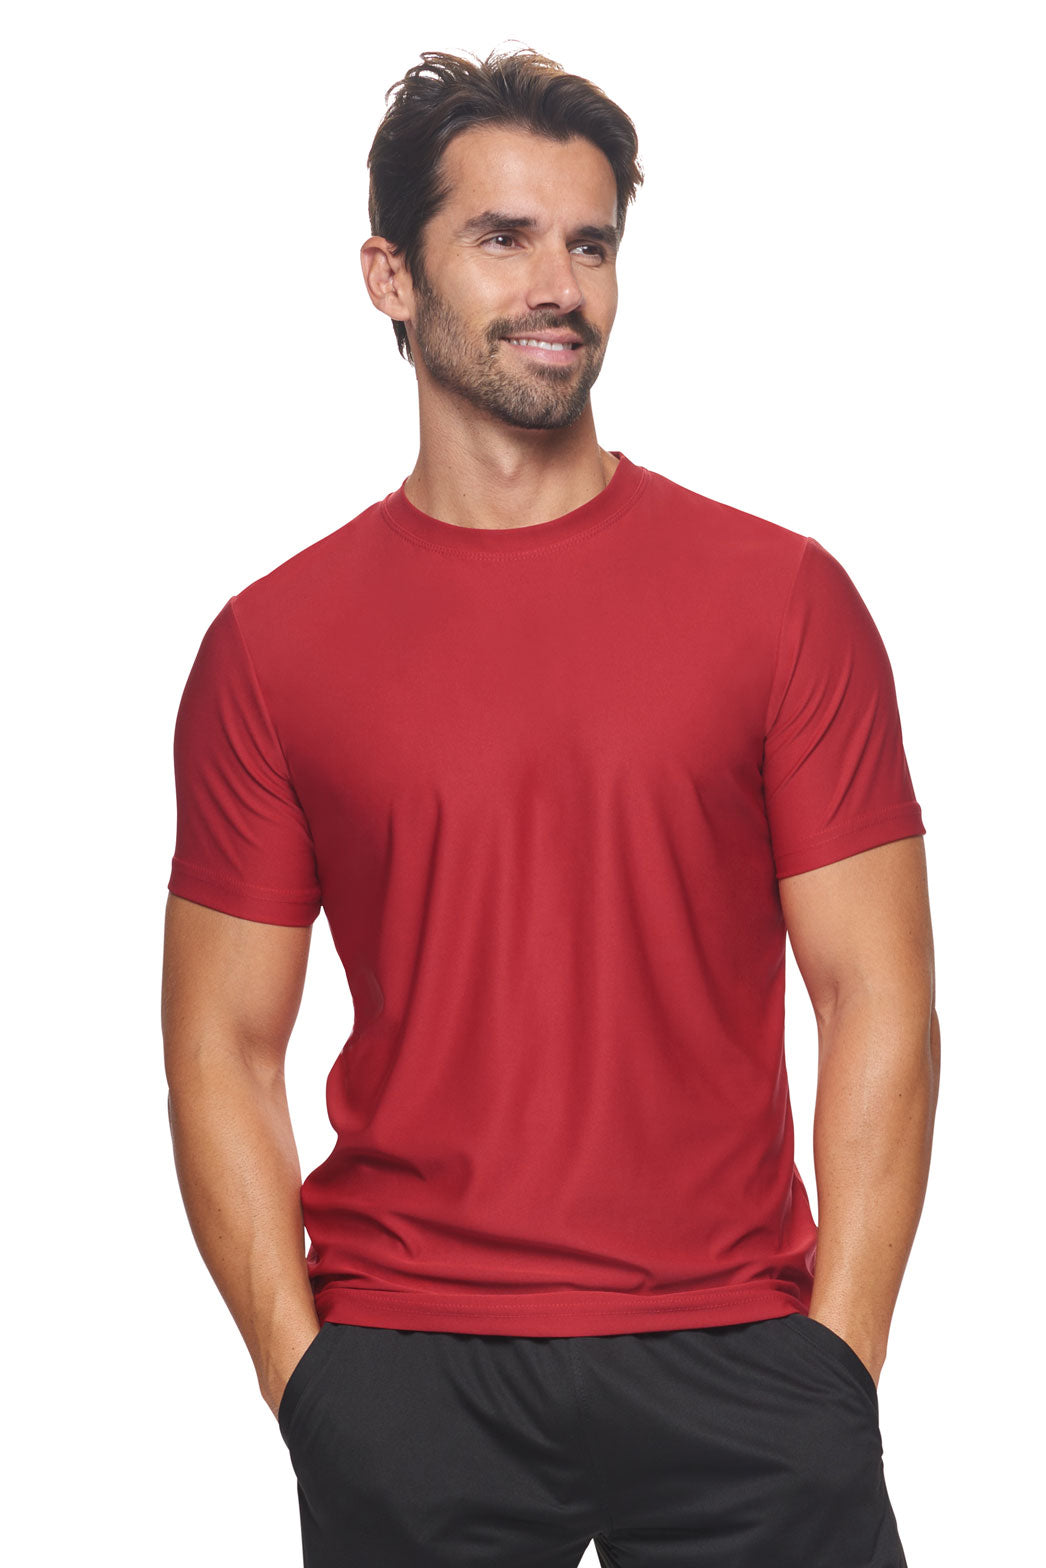 Expert Brand Apparel Made in USA Recycled Polyester Repreve Performance Tee Unisex RP801U Poinsettia#color_poinsettia